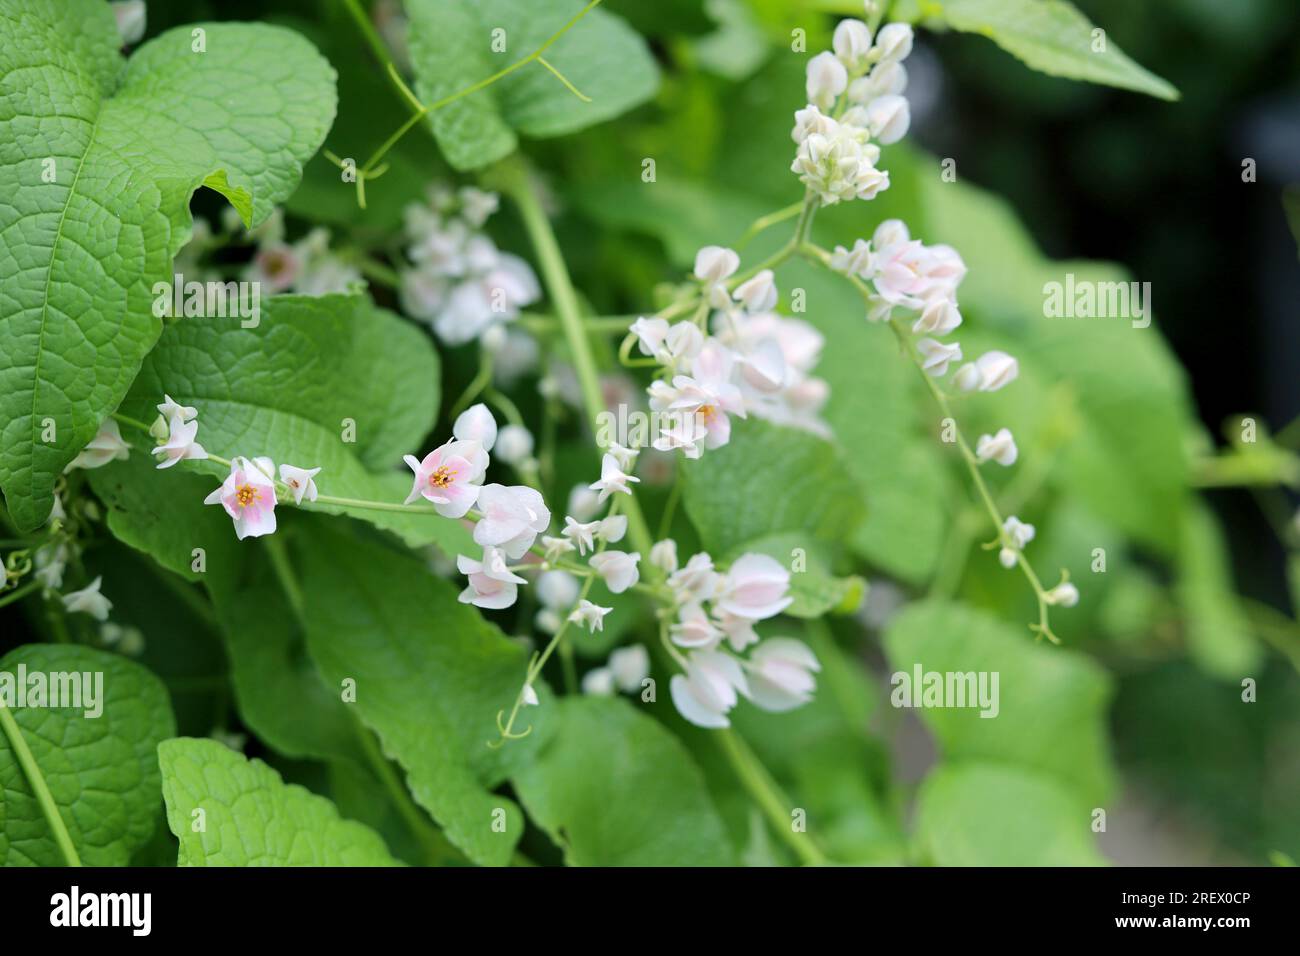 Close up and selective focus of Antigonon leptopus, white and tiny flowers, nature wallpaper Stock Photo